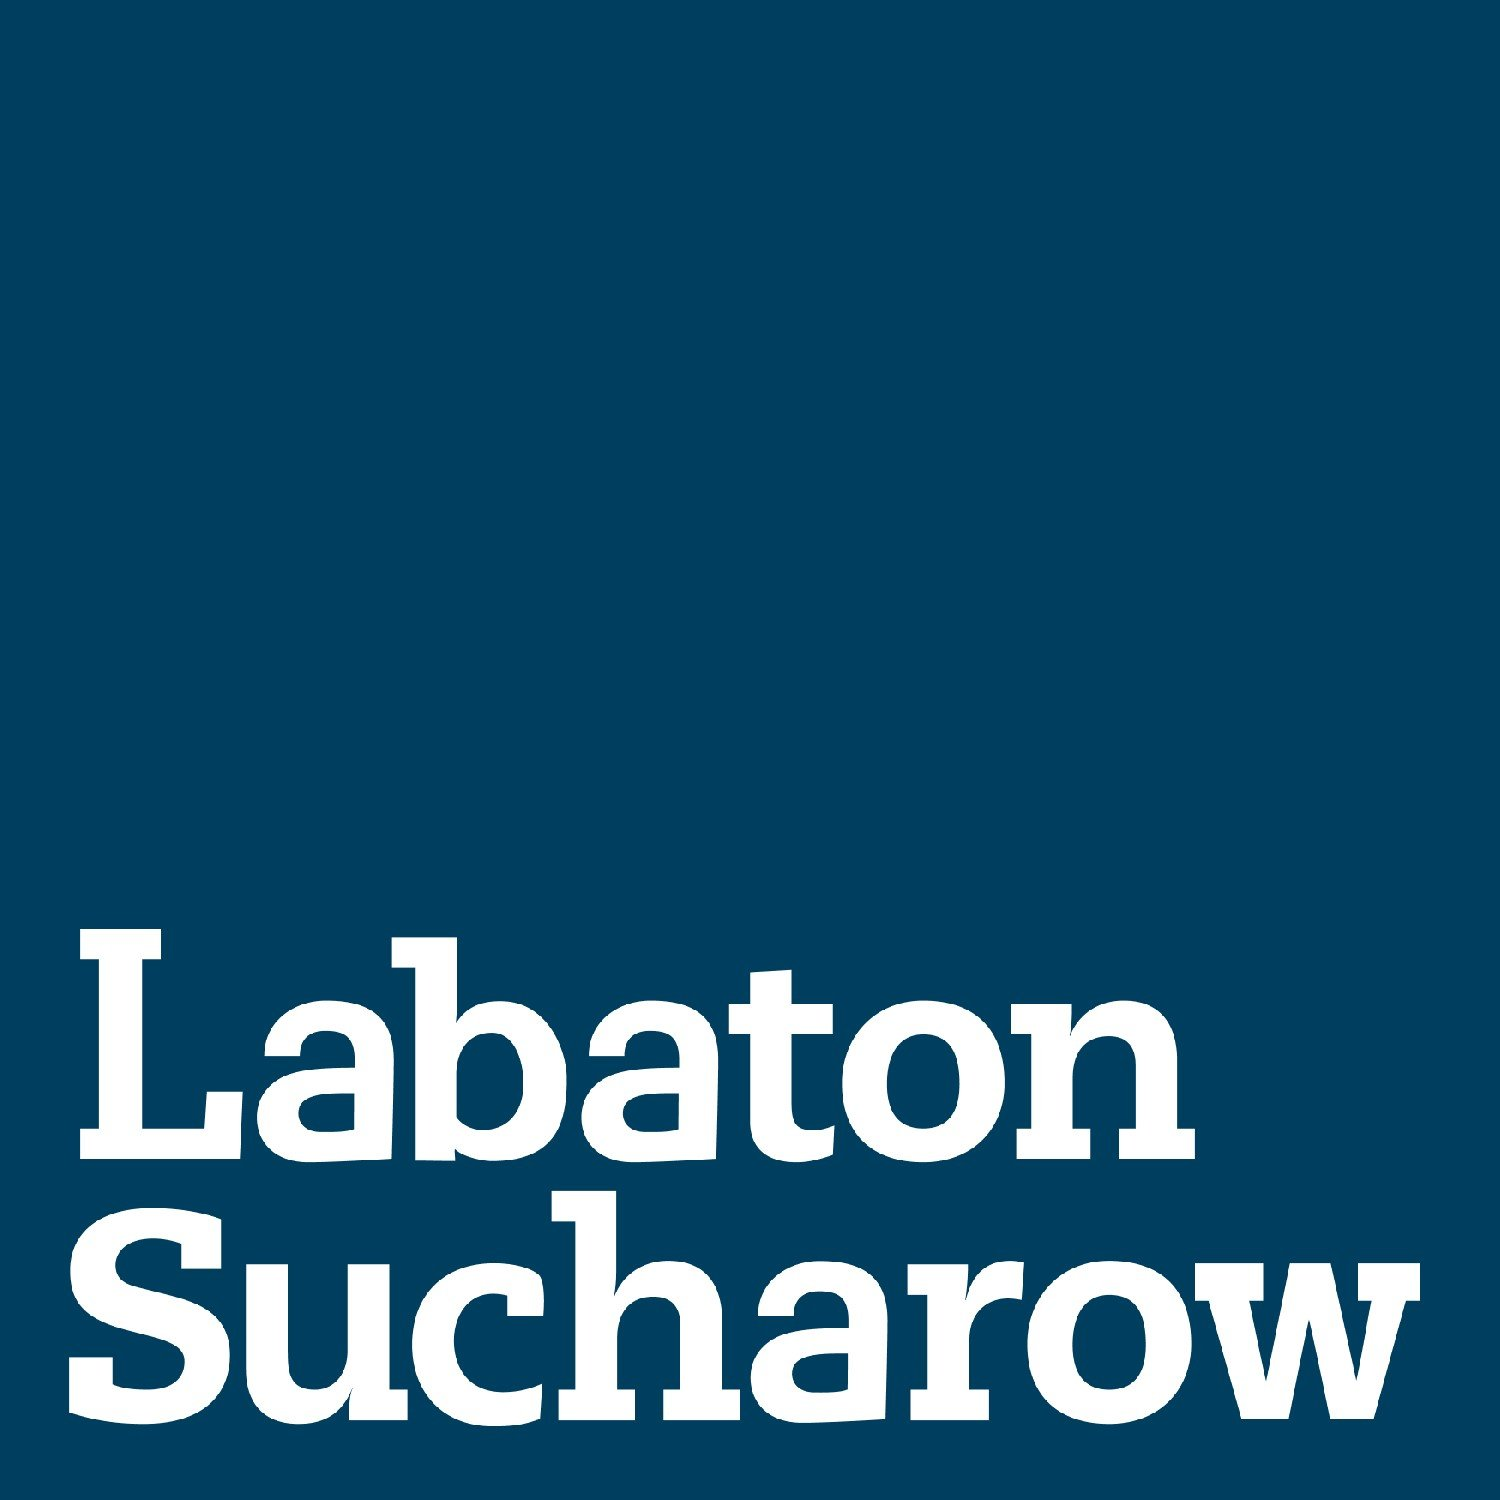 Labaton Sucharow LLP, Friday, January 29, 2021, Press release picture